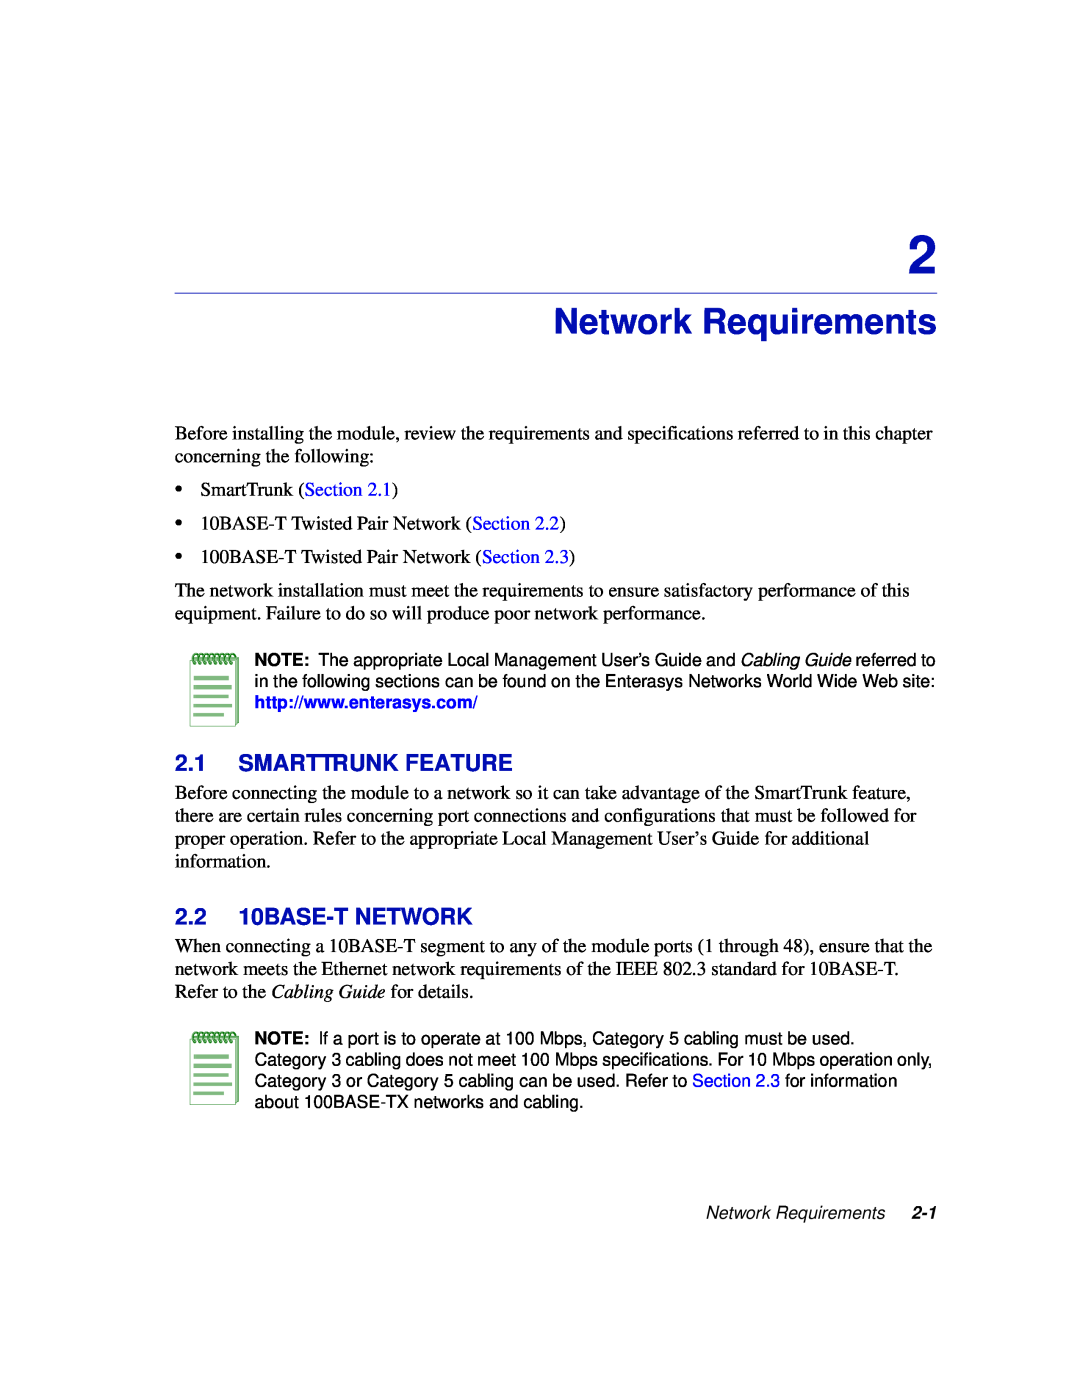 Enterasys Networks 6H302-48 manual Network Requirements, Smarttrunk Feature, 2.2 10BASE-T NETWORK 